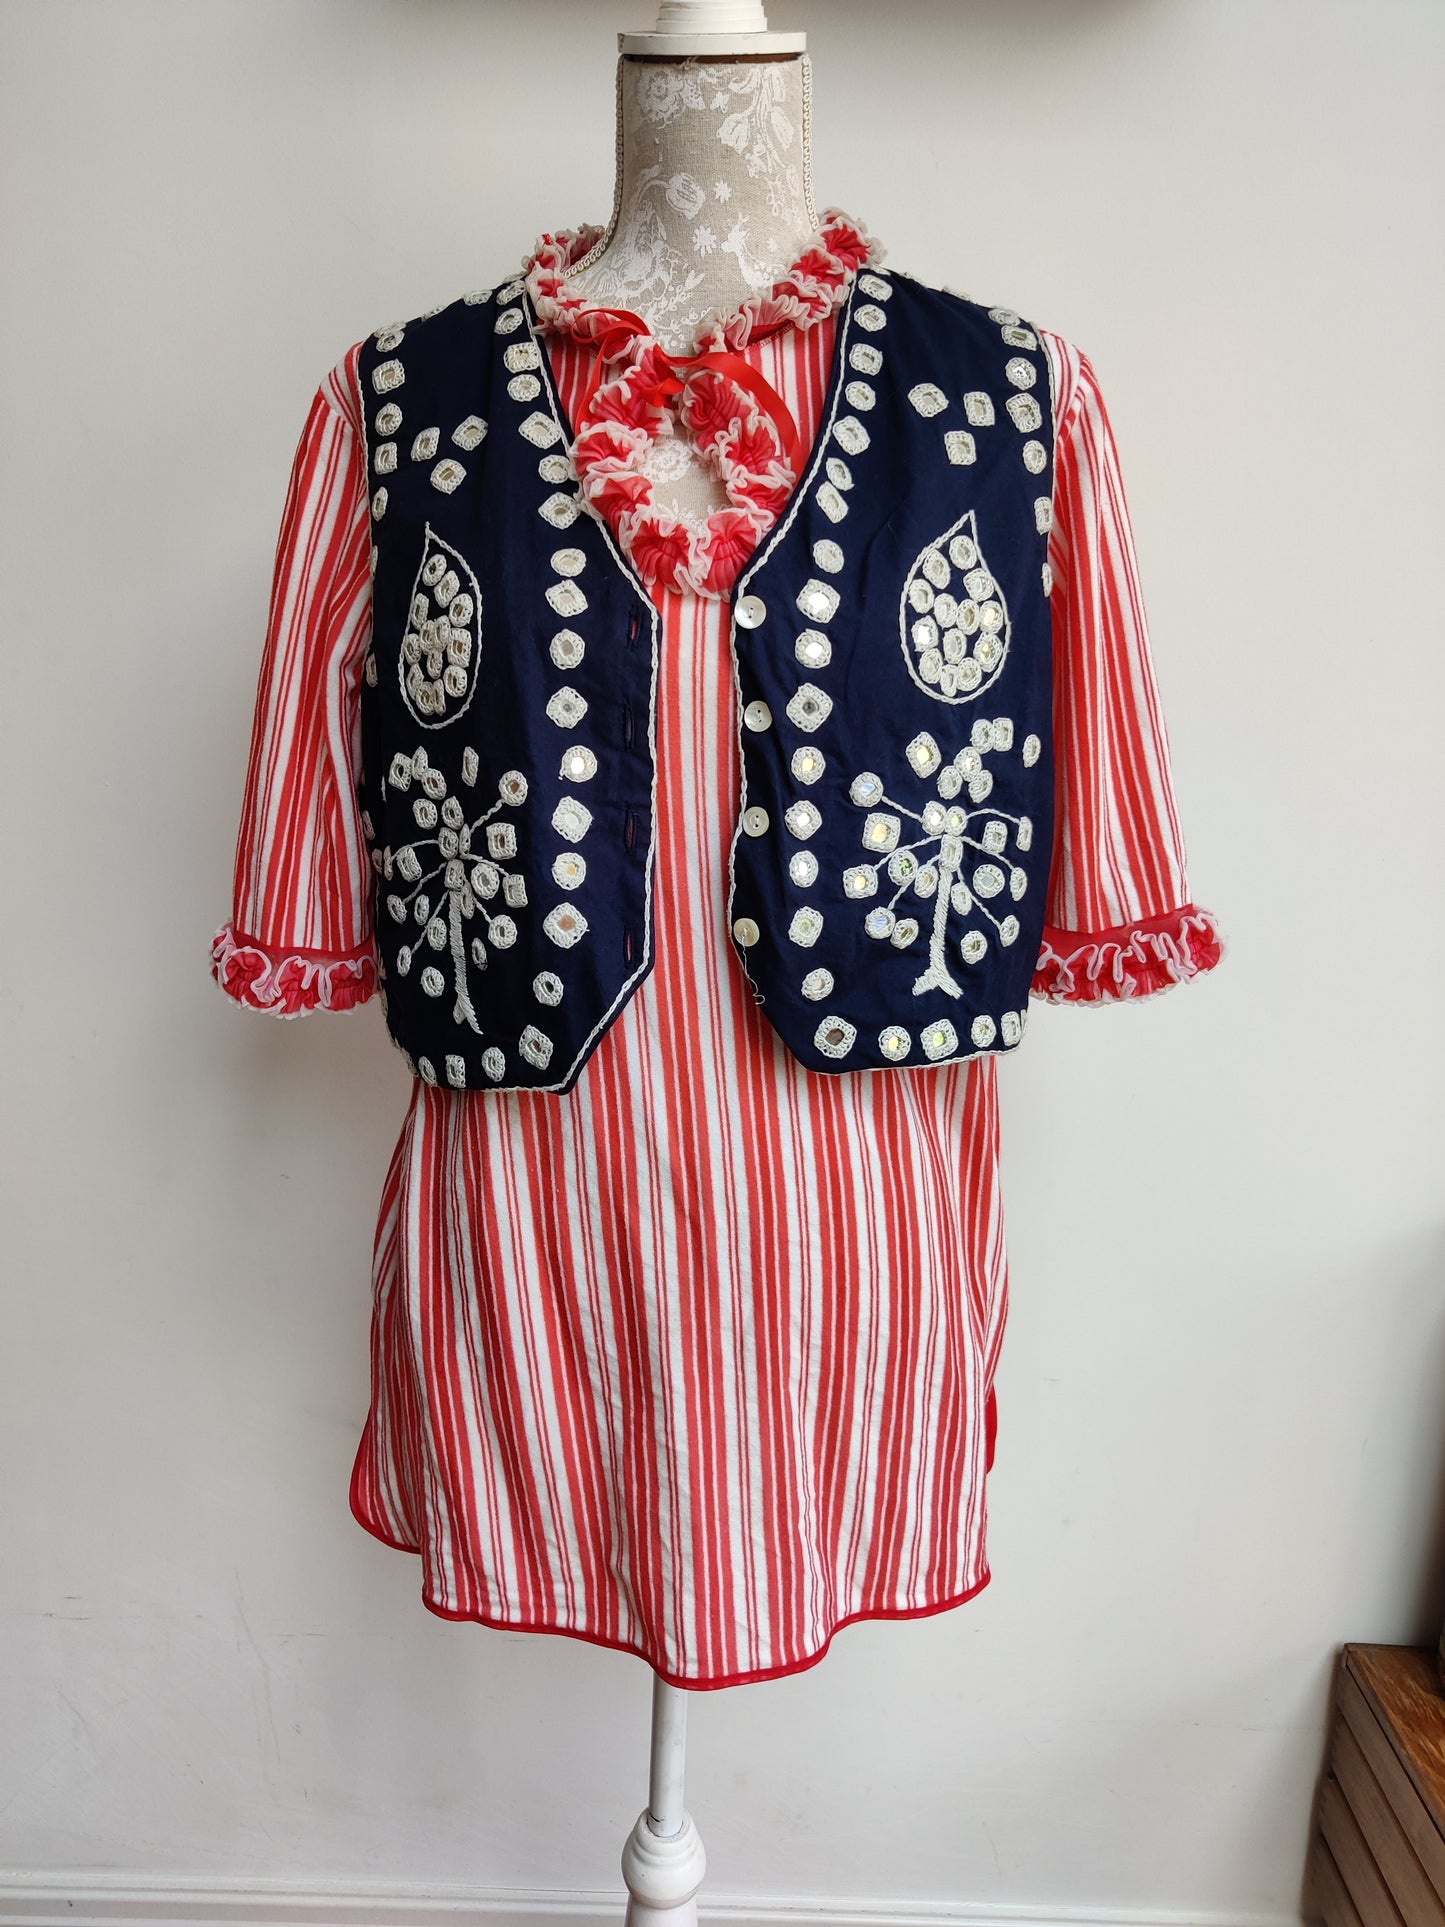 Vintage boho waistcoat in navy blue with embroidery hippy mirror detail. Size 10-14.